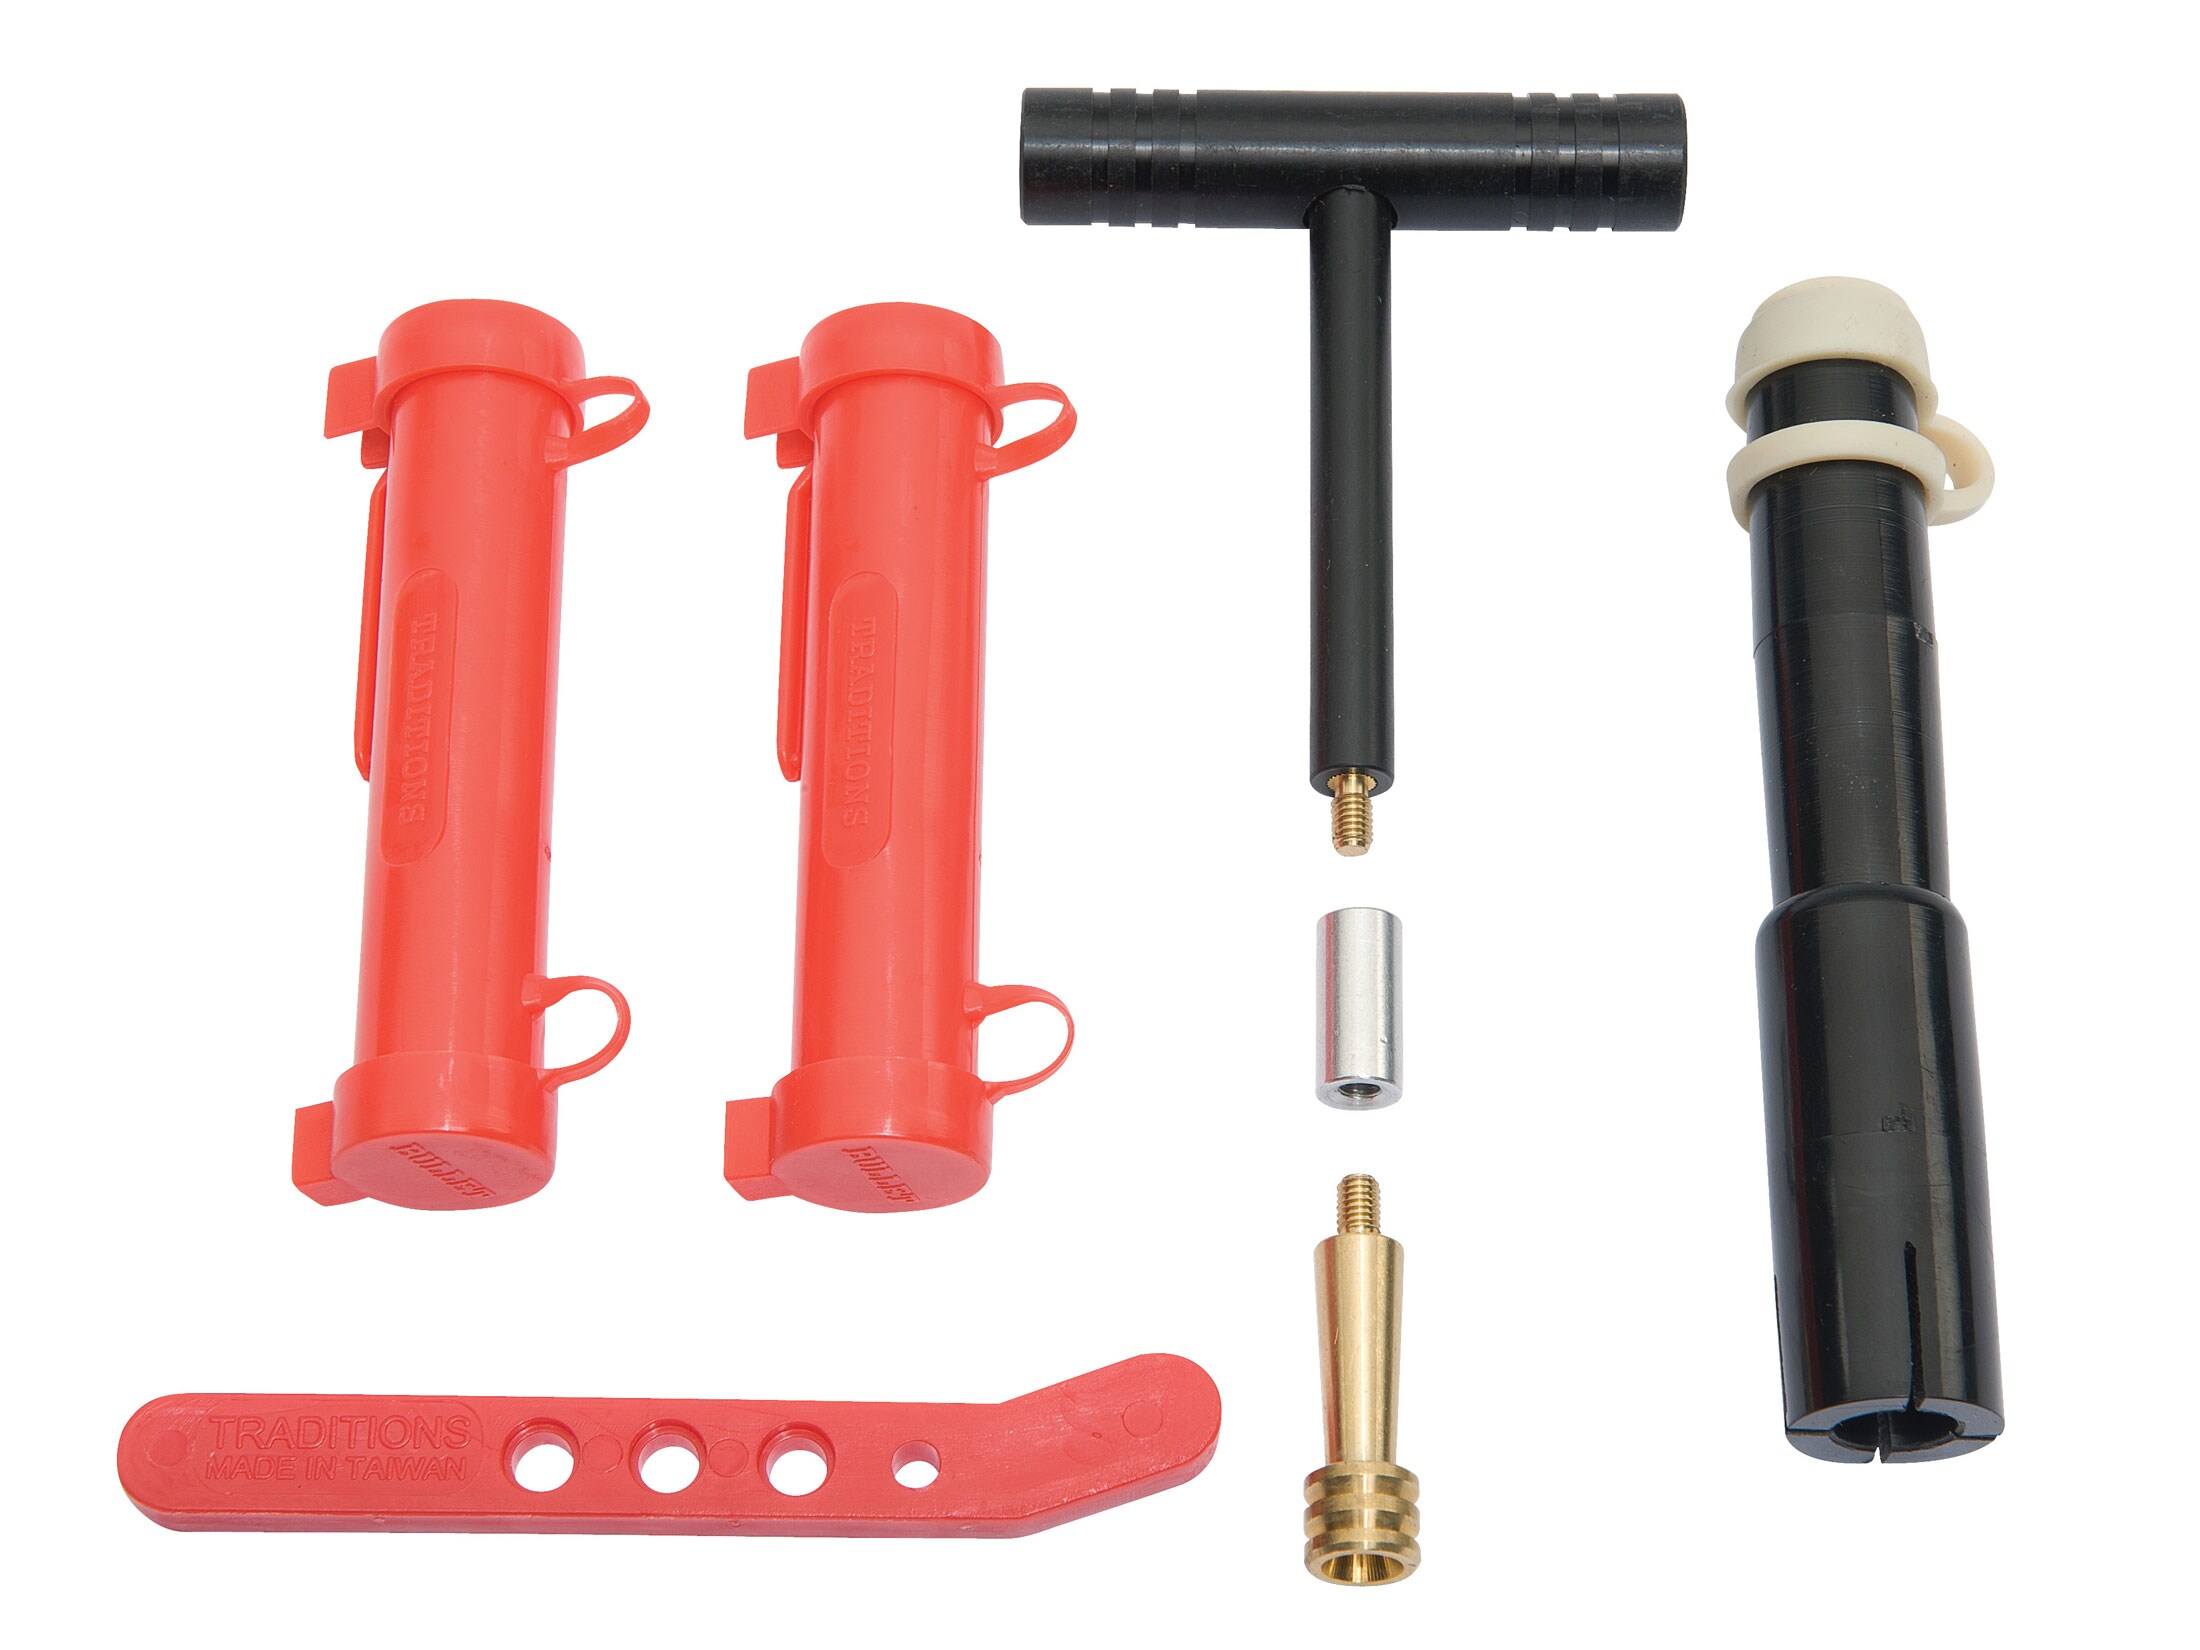 Image of Traditions Black Powder Load It Kit For .50 Caliber Muzzleloaders